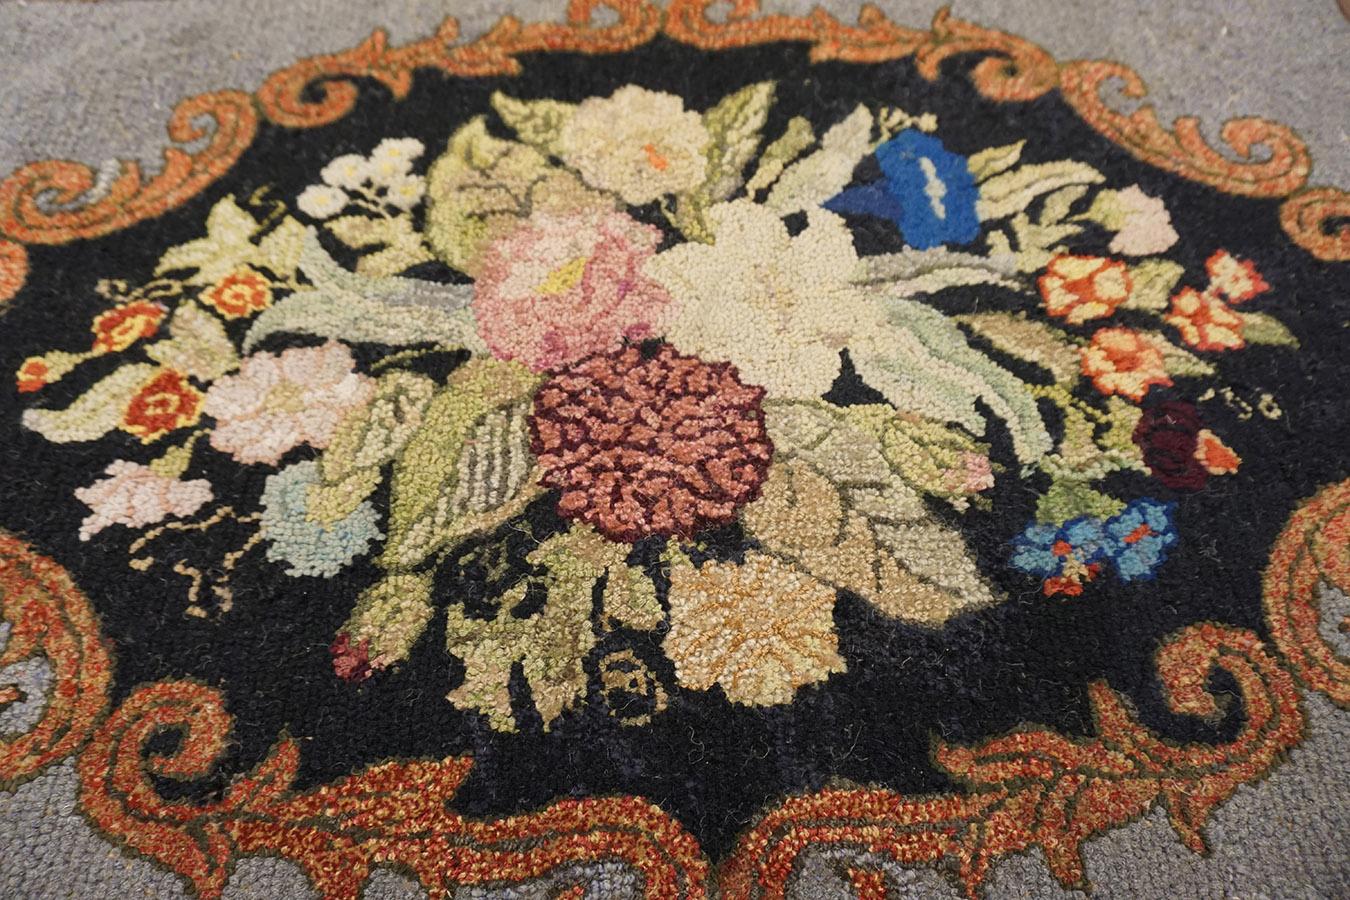 Early 20th Century American Hooked Rug ( 2' x 3' - 62 x 92 ) For Sale 3